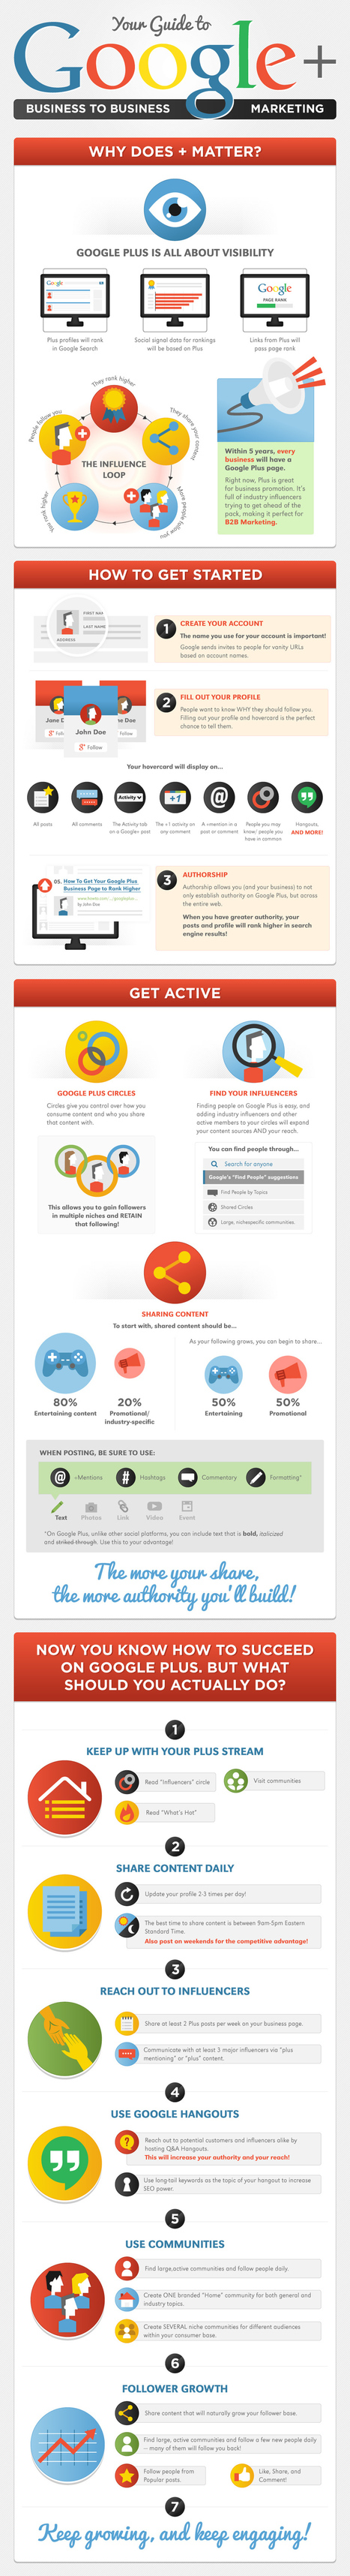 The Complete Guide to Google+ for B2B Marketing [Infographic] - Webbiquity | The MarTech Digest | Scoop.it